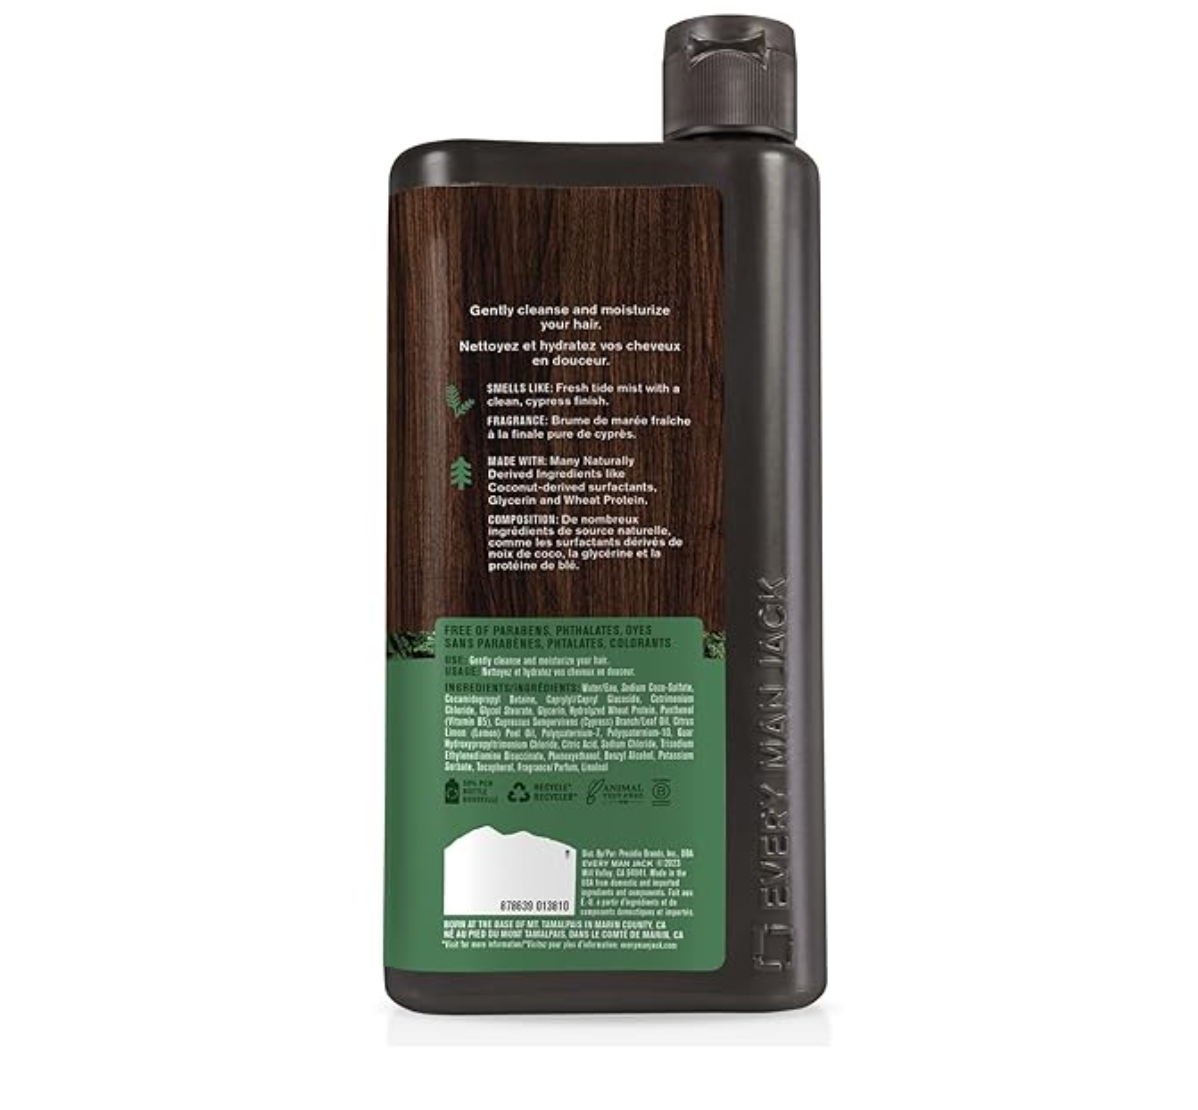 Product Title: Every Man Jack 2-in-1 Daily Men's Shampoo + Conditioner / Naturally Derived and No Harmful Chemicals -24oz